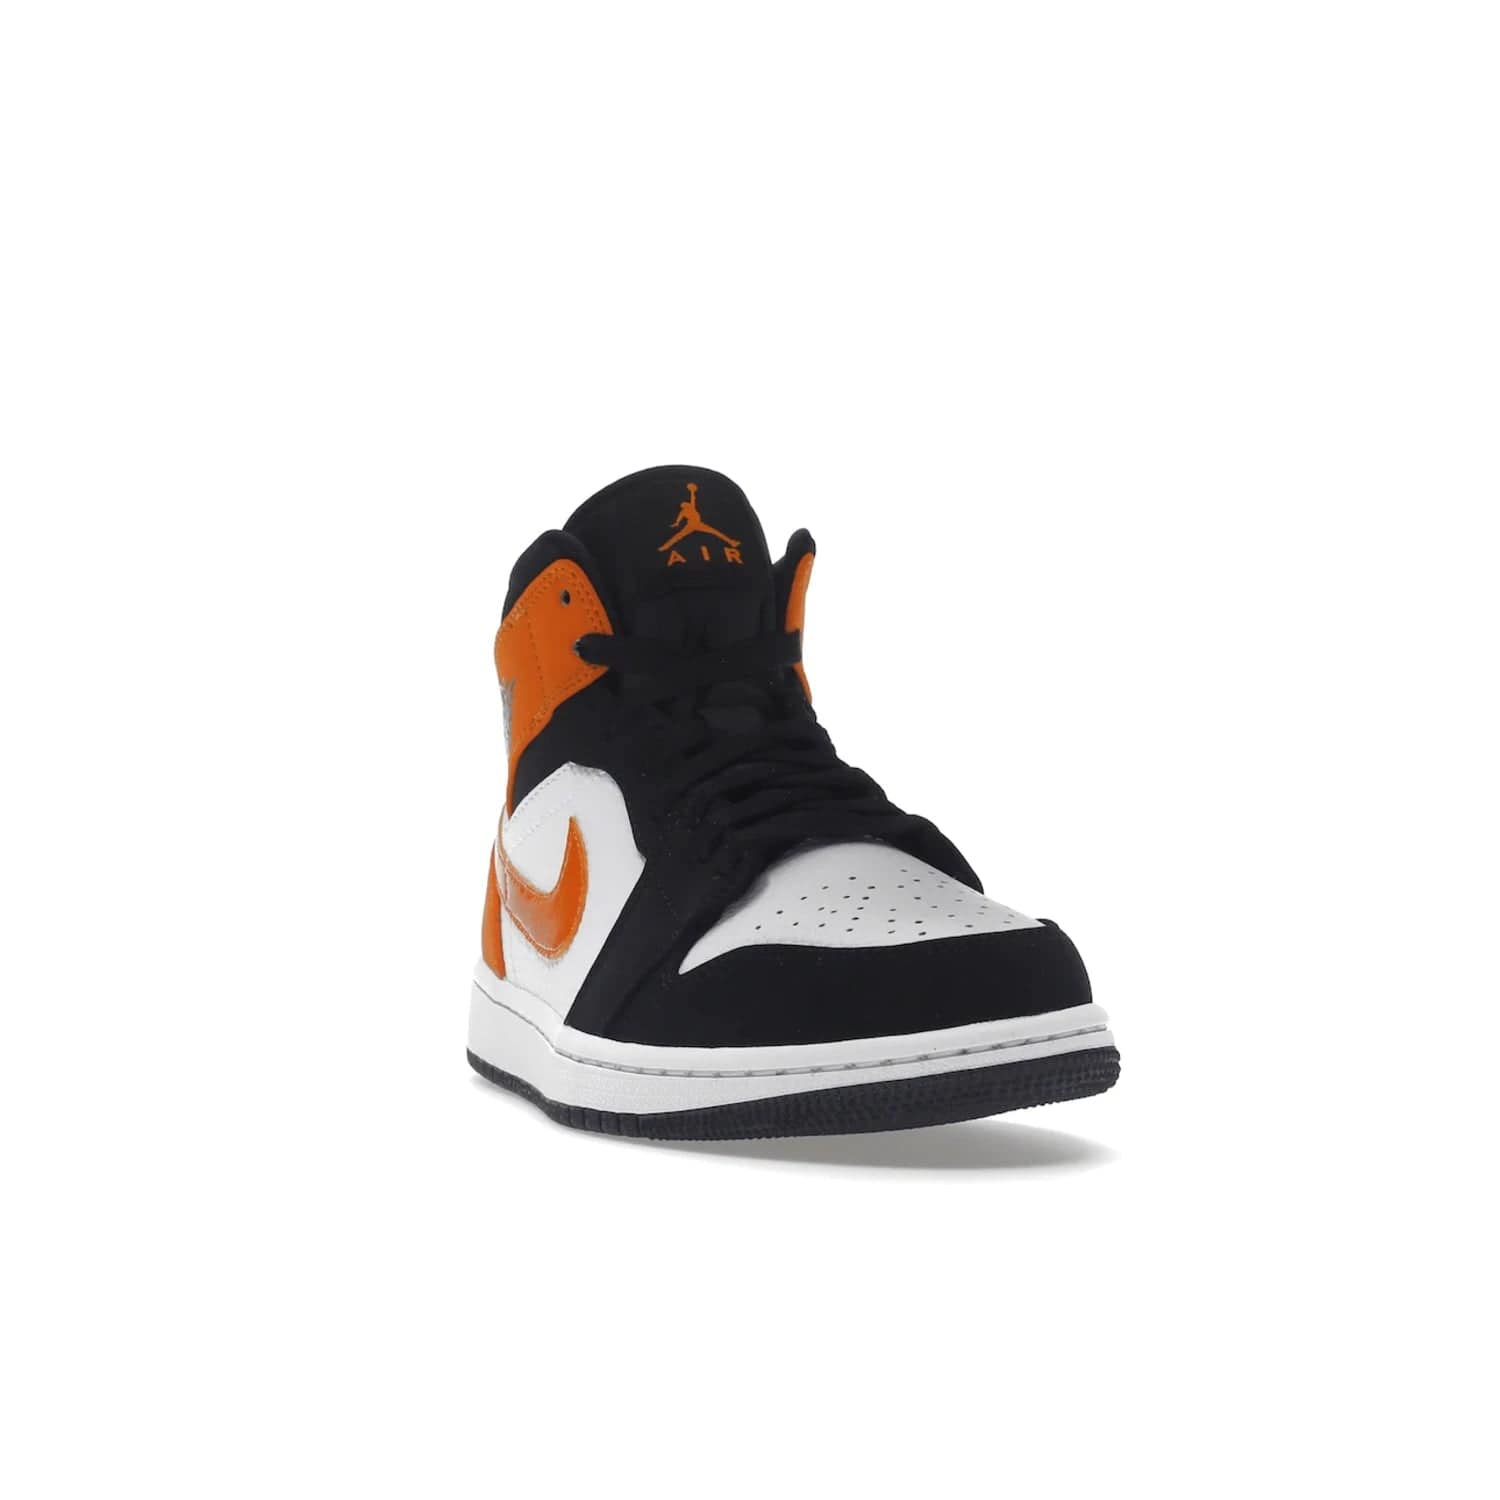 Jordan 1 Mid Shattered Backboard - Image 8 - Only at www.BallersClubKickz.com - The Air Jordan 1 Mid Shattered Backboard offers a timeless Black/White-Starfish colorway. Classic Swoosh logo and AJ insignia plus a shatterd backboard graphic on the insole. Get your pair today!